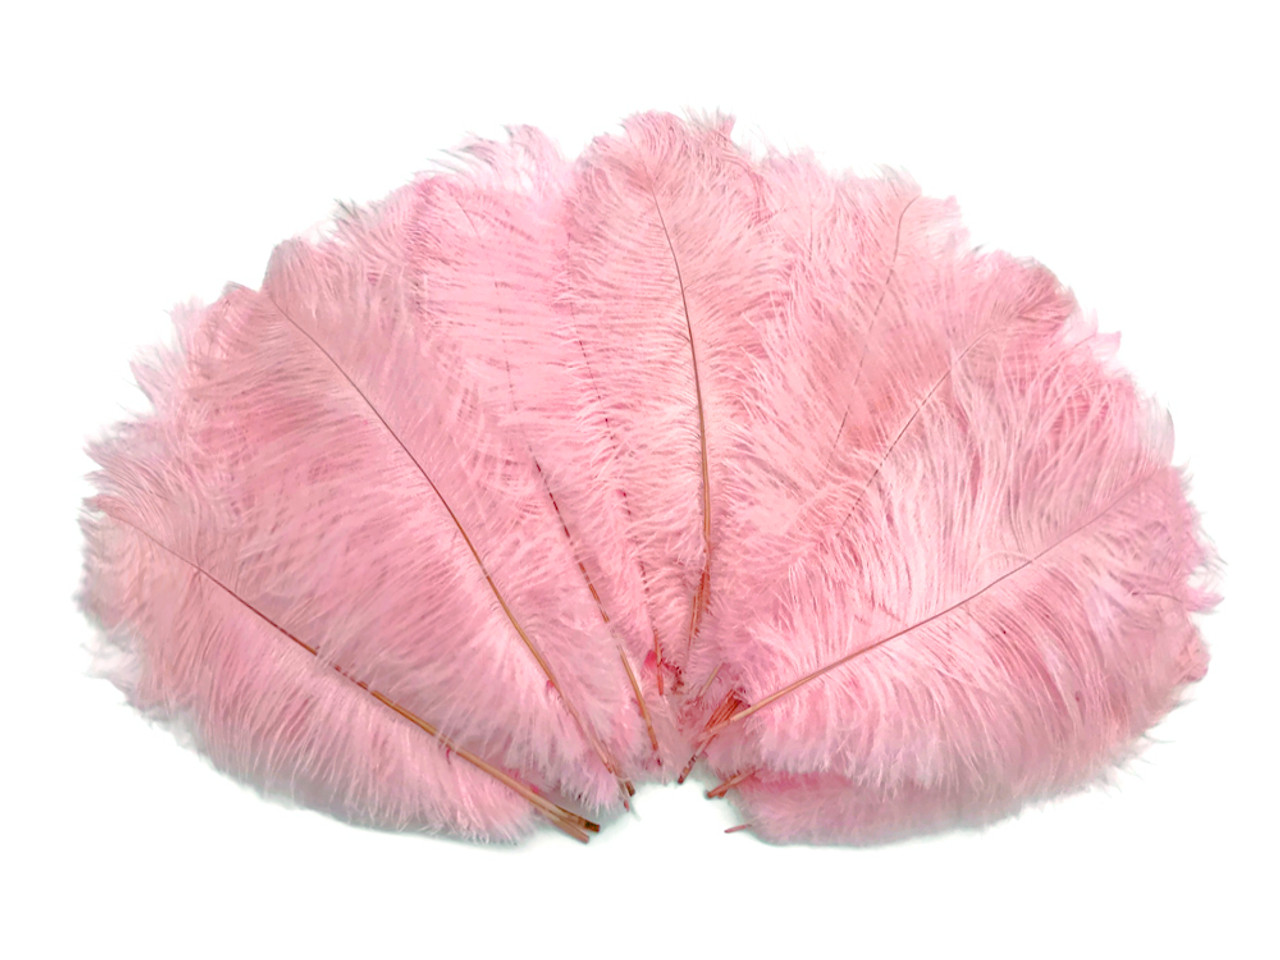 BULK 1/2lb Ostrich Feather Tail Plumes 15-20 (Baby Pink) for Sale